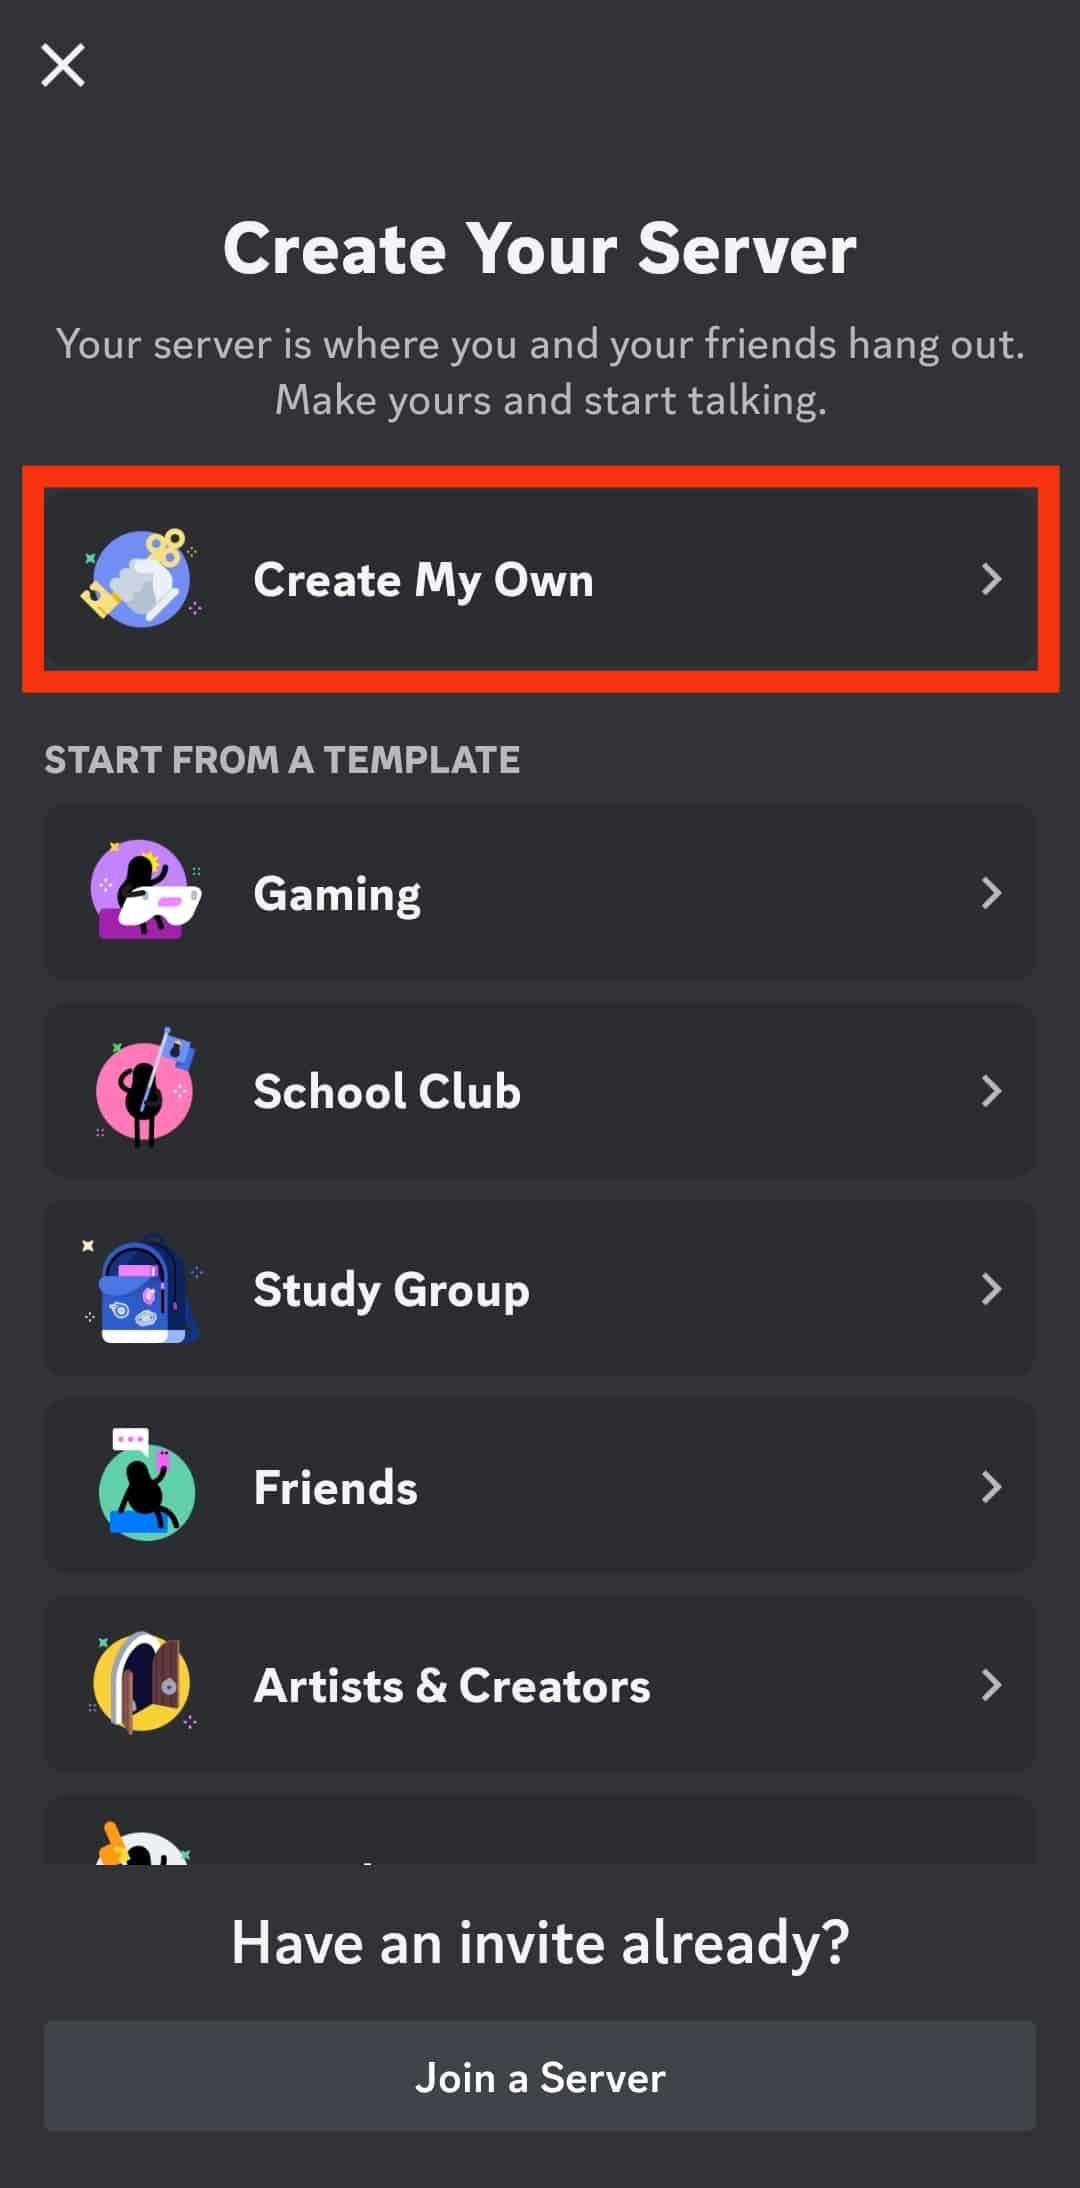 Tap On The Create My Own Option